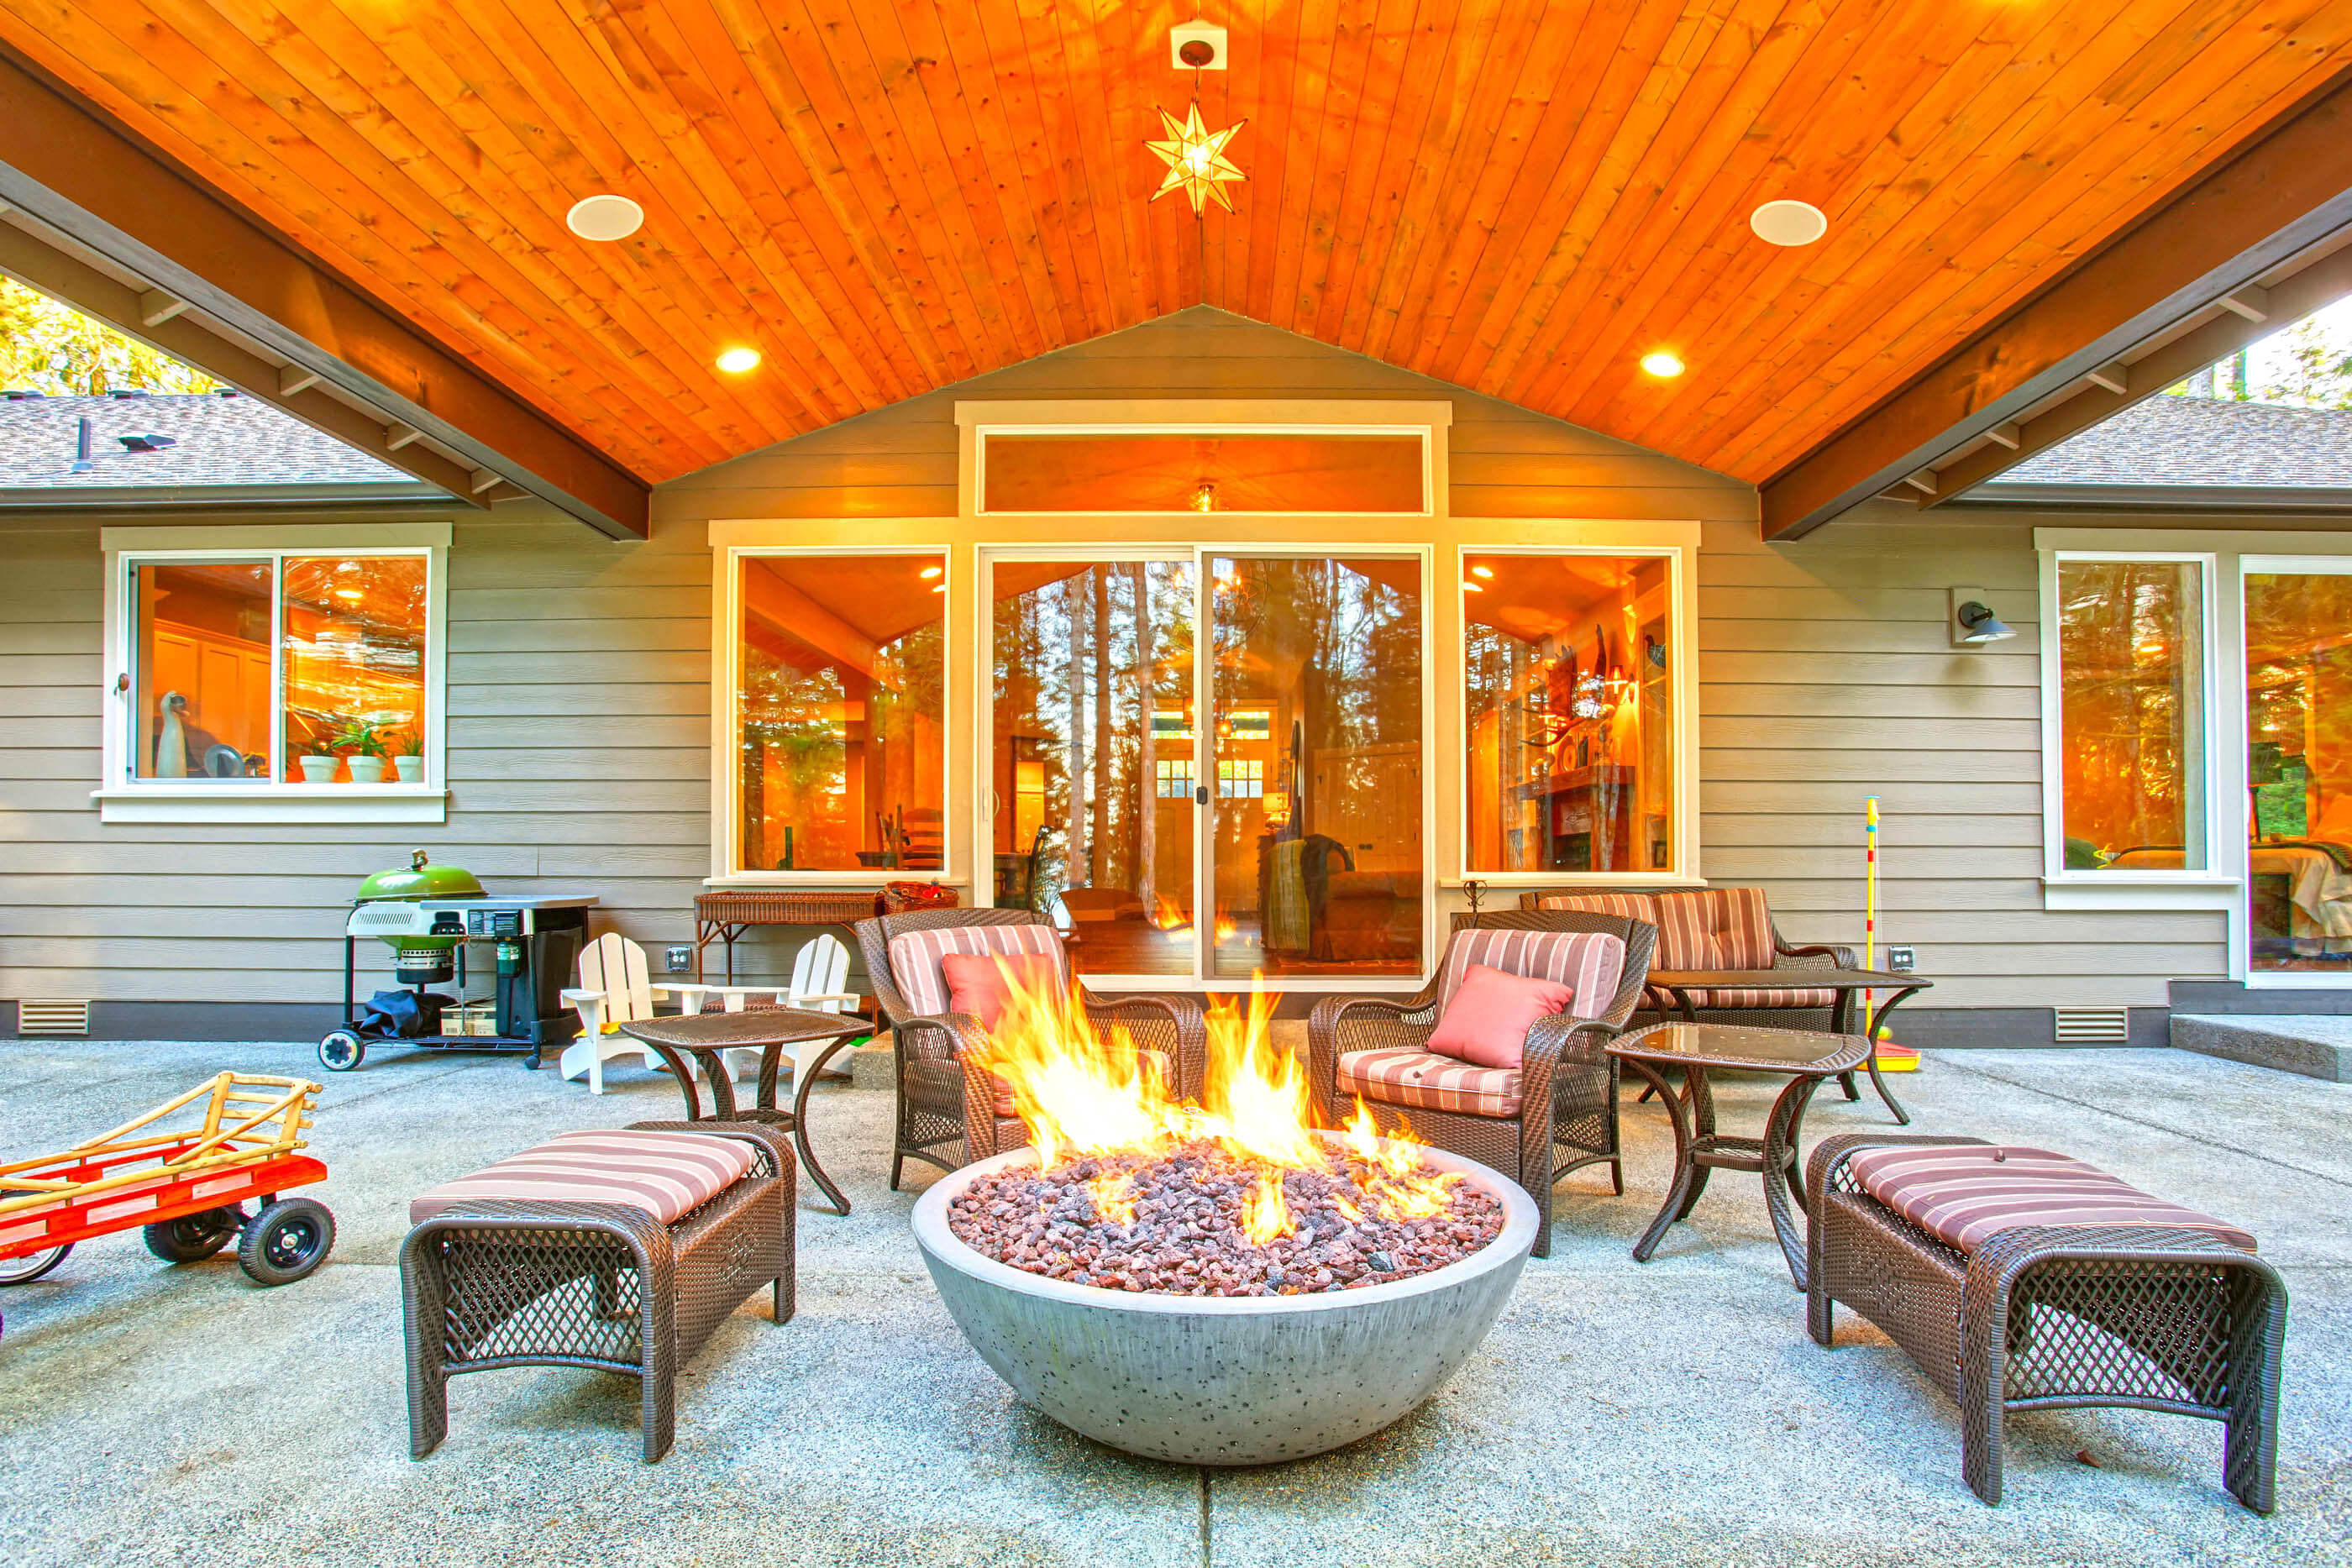 Houston Outdoor Fireplaces Poolside, Outdoor Fire Pit Houston Tx